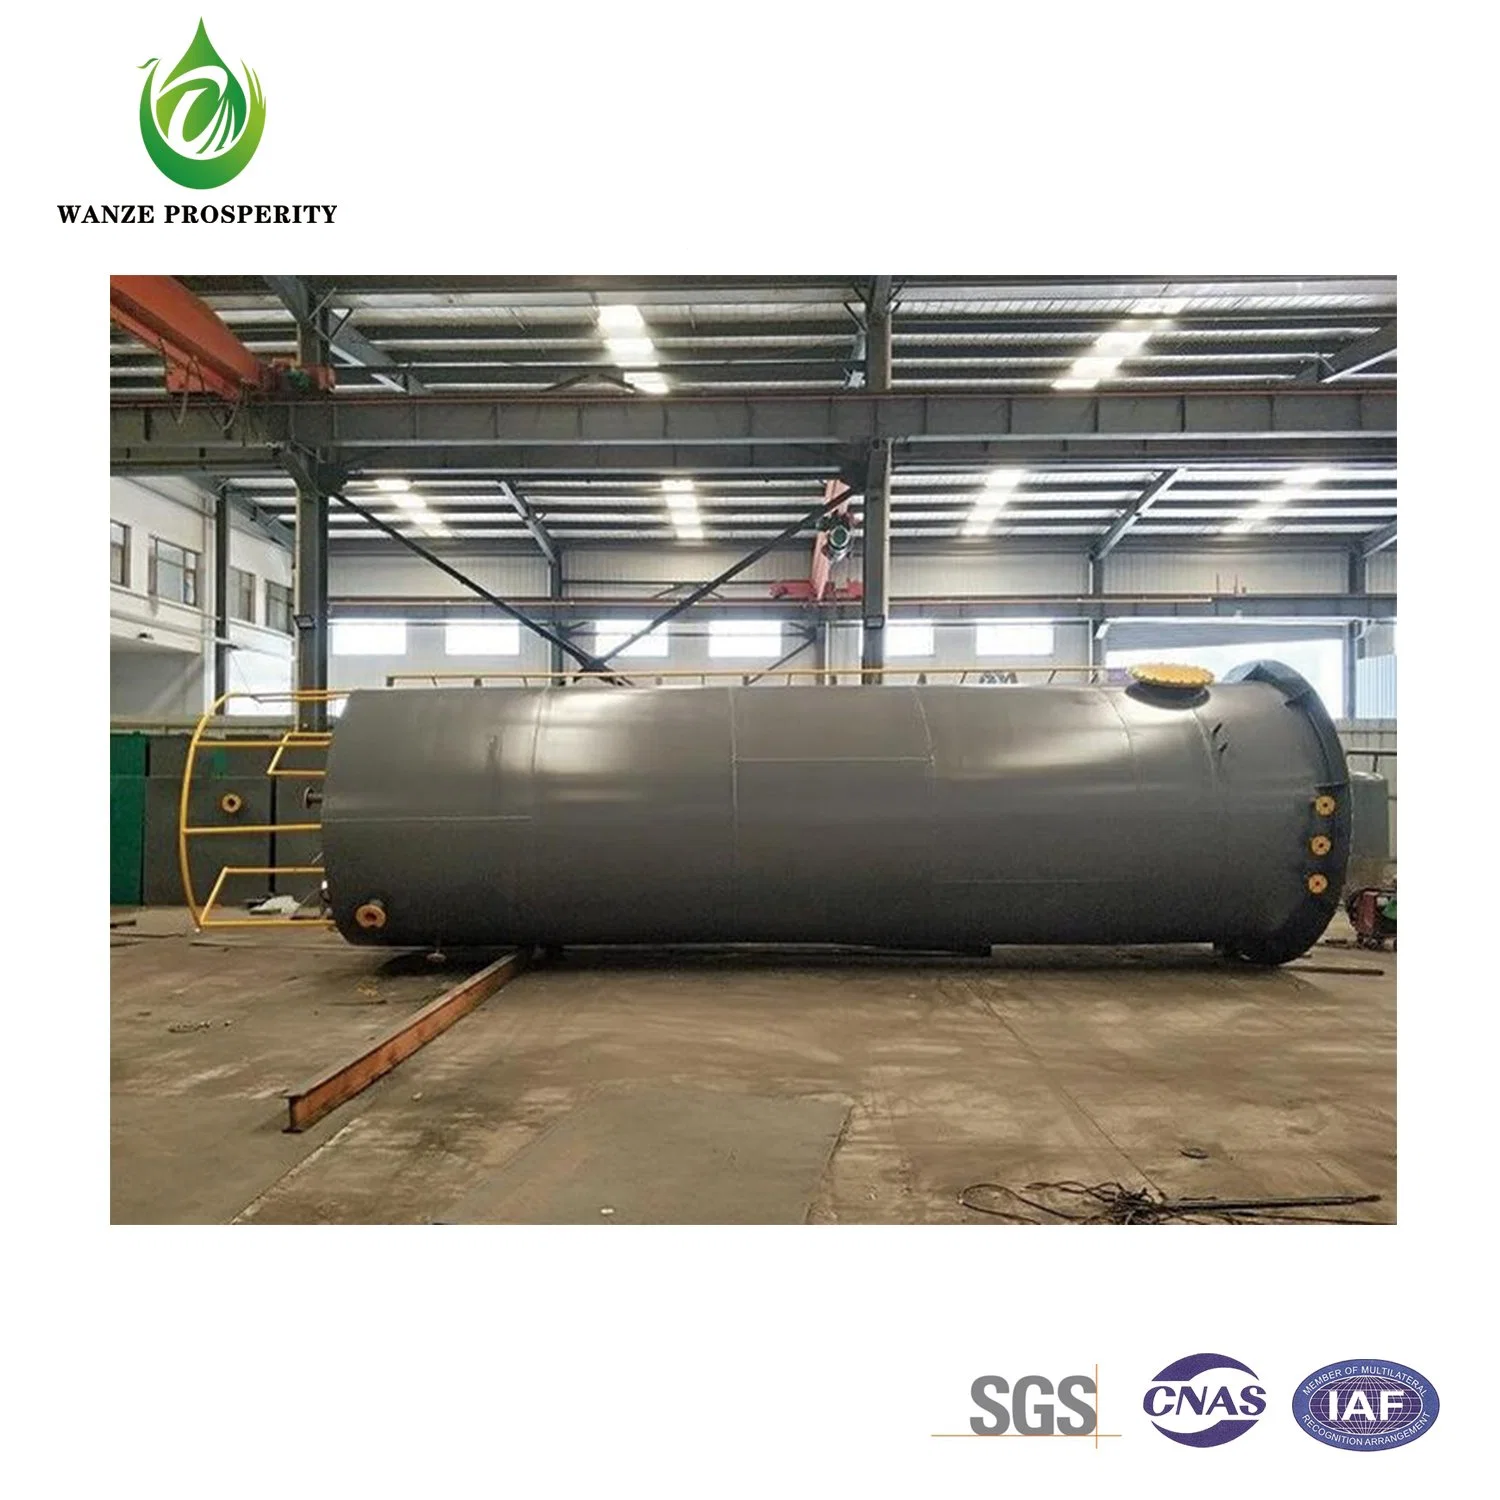 Anaerobic Tanks for Wastewater Treatment in The Papermaking Industry